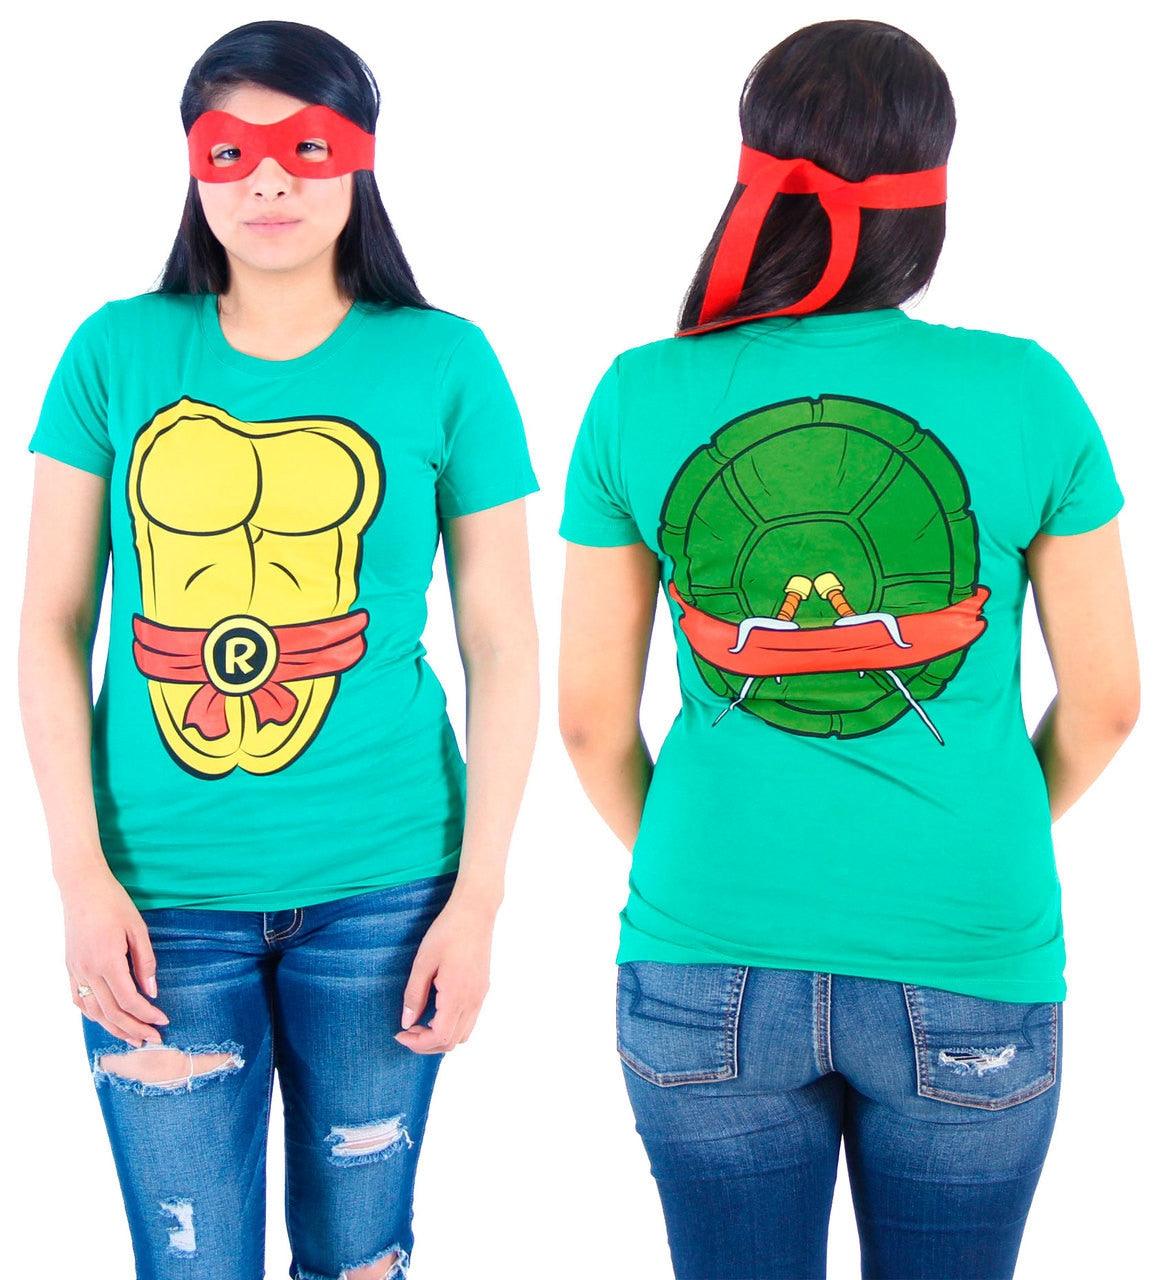 Top teenage Mutant Ninja Turtles Dude I Am 6 Years Old Mikey Pizza Birthday  Party T-shirt, hoodie, sweater, longsleeve and V-neck T-shirt